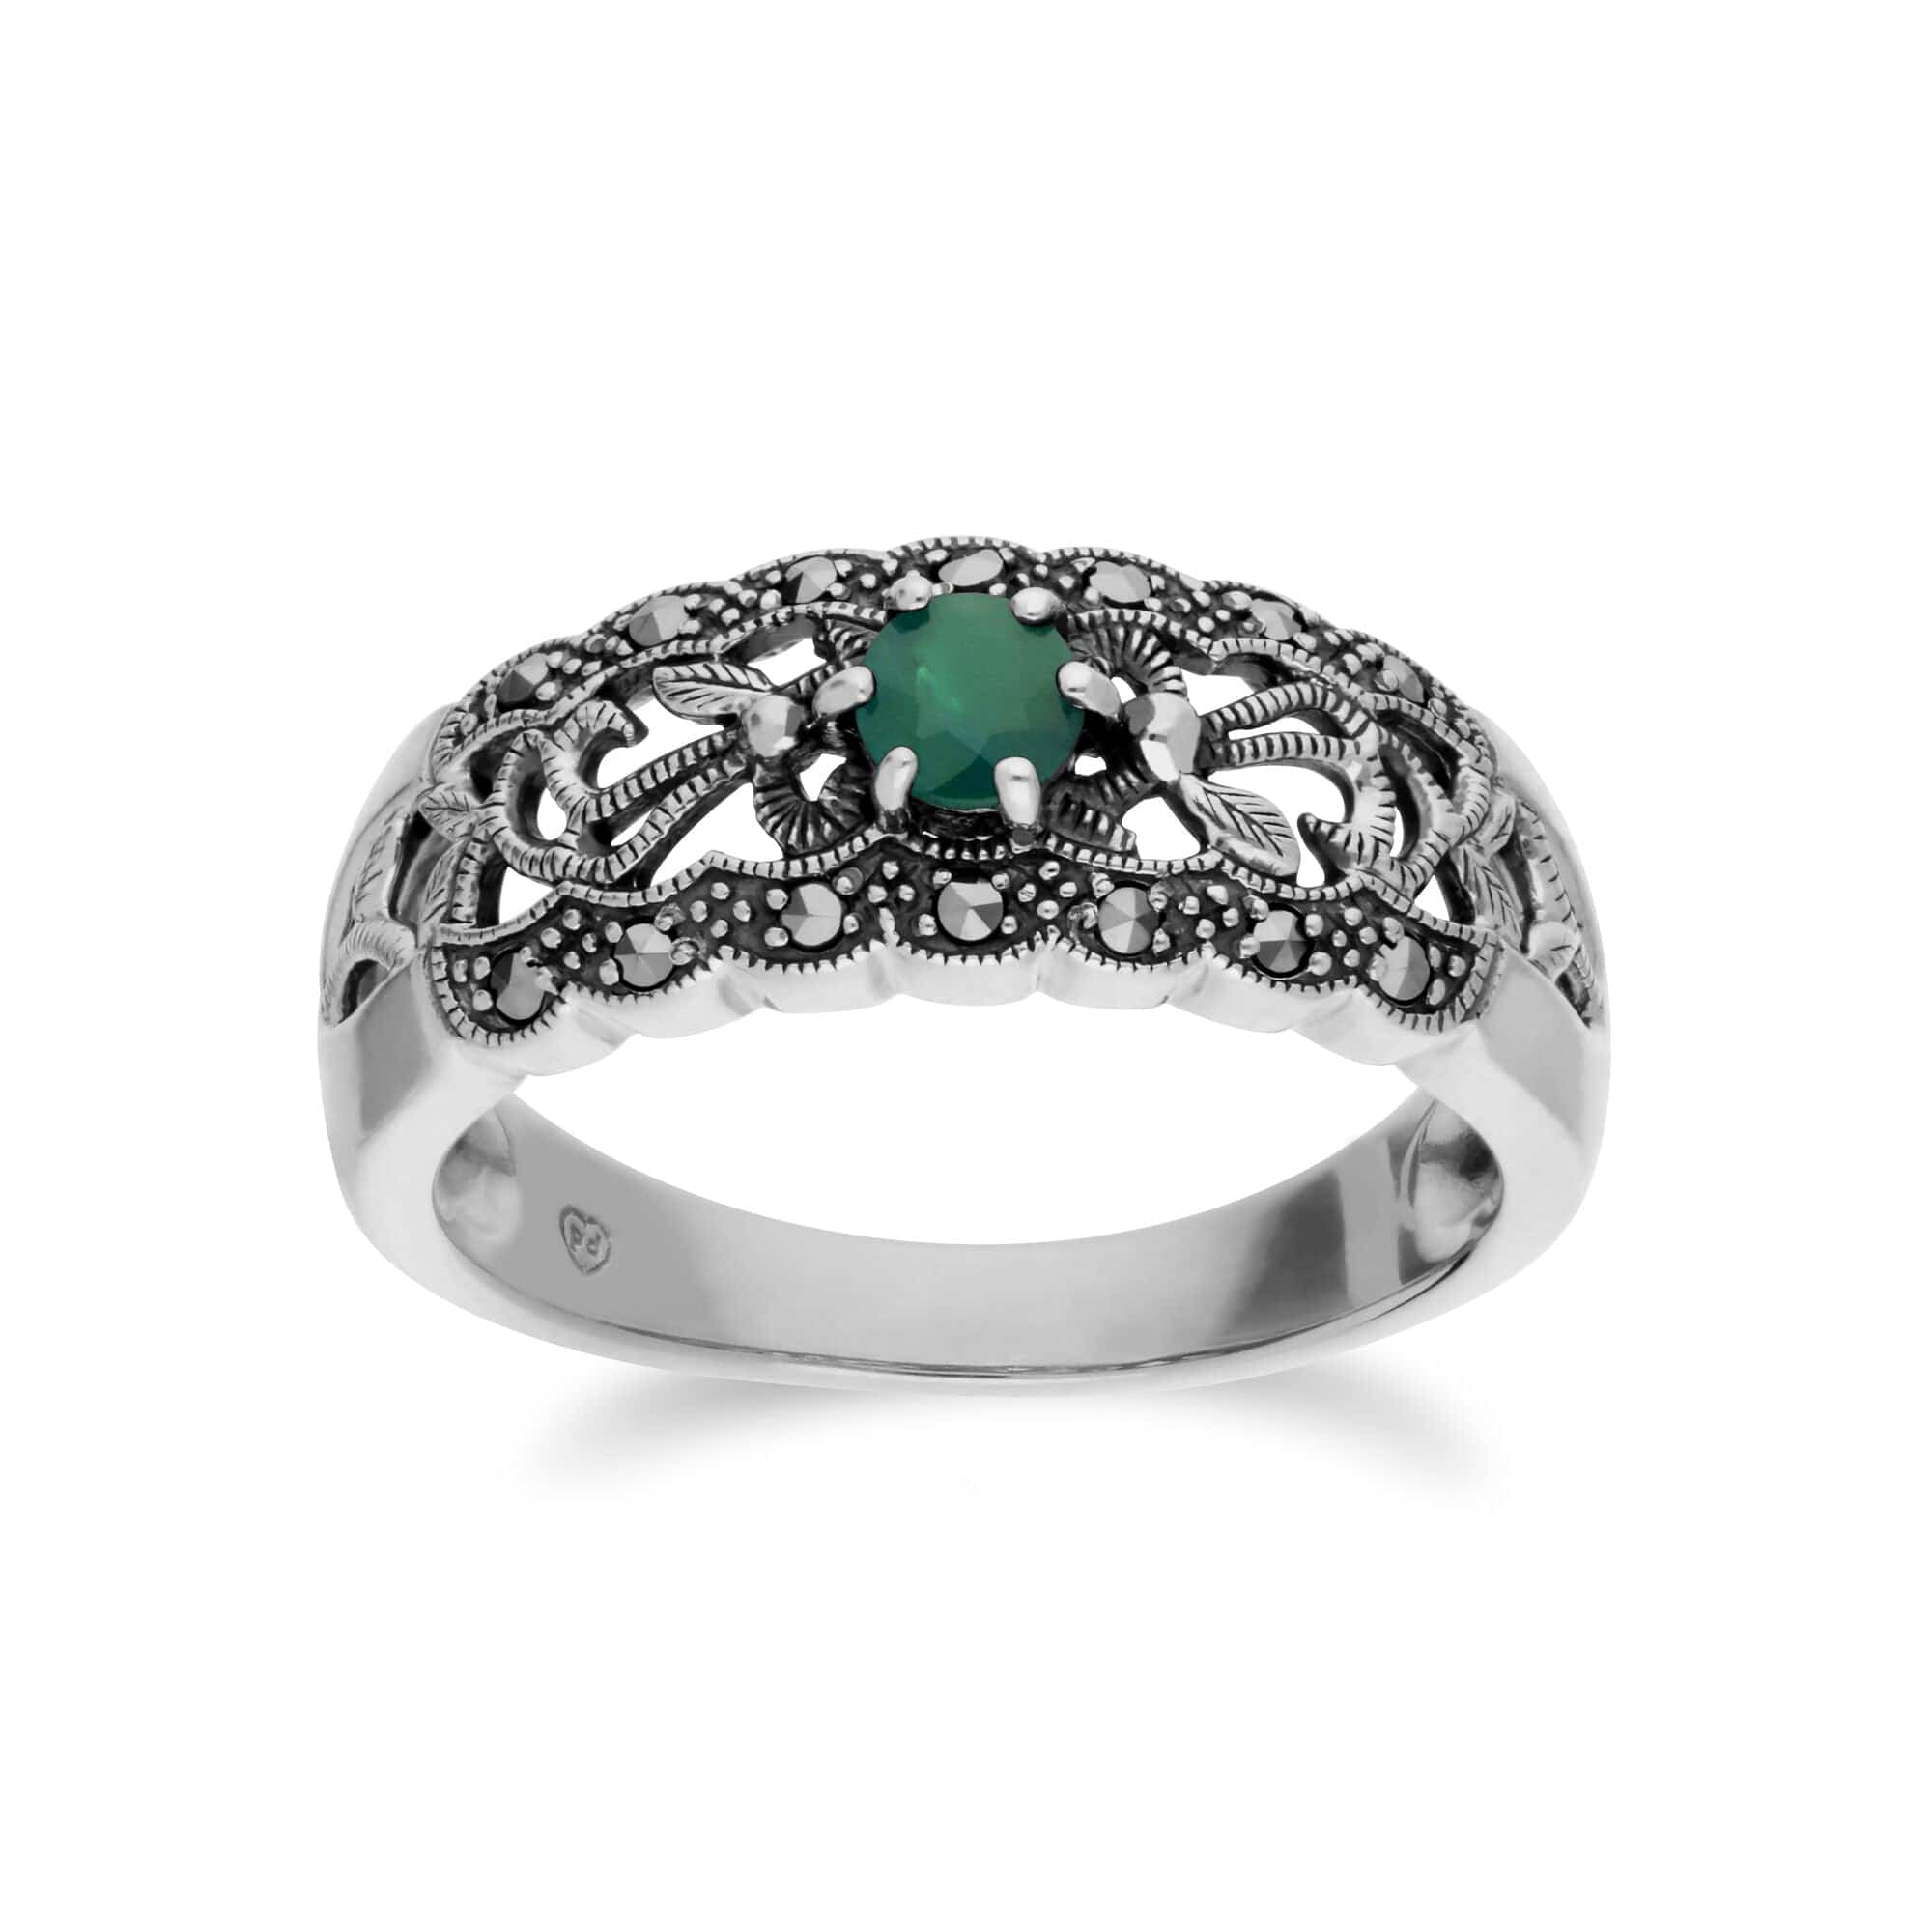 214R597706925 Art Nouveau Style Round Emerald & Marcasite Floral Band Ring in Sterling Silver 1